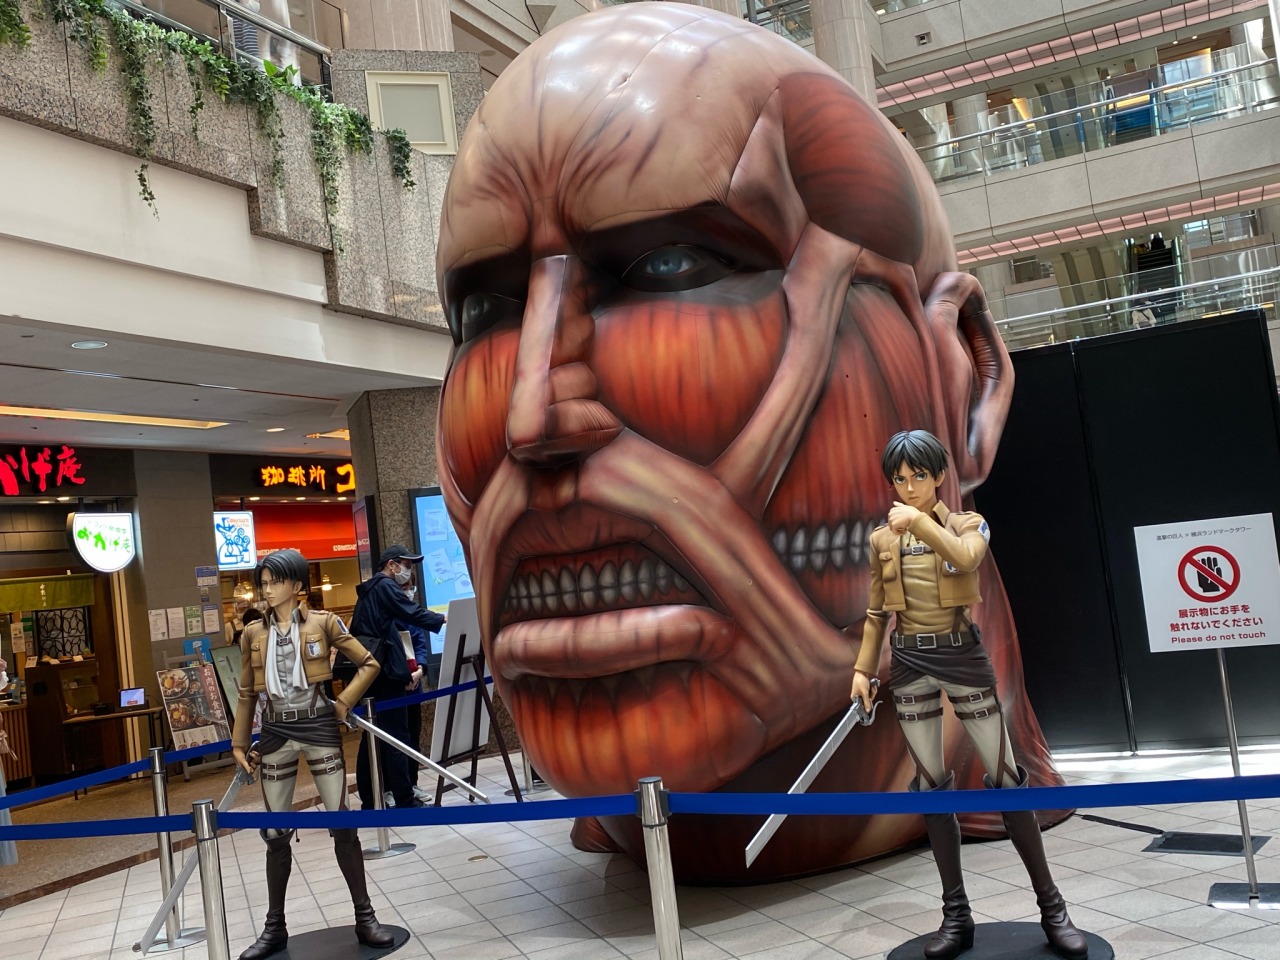 Attack on Titan Exhibition FINAL attack Beans dish Anime Japan 